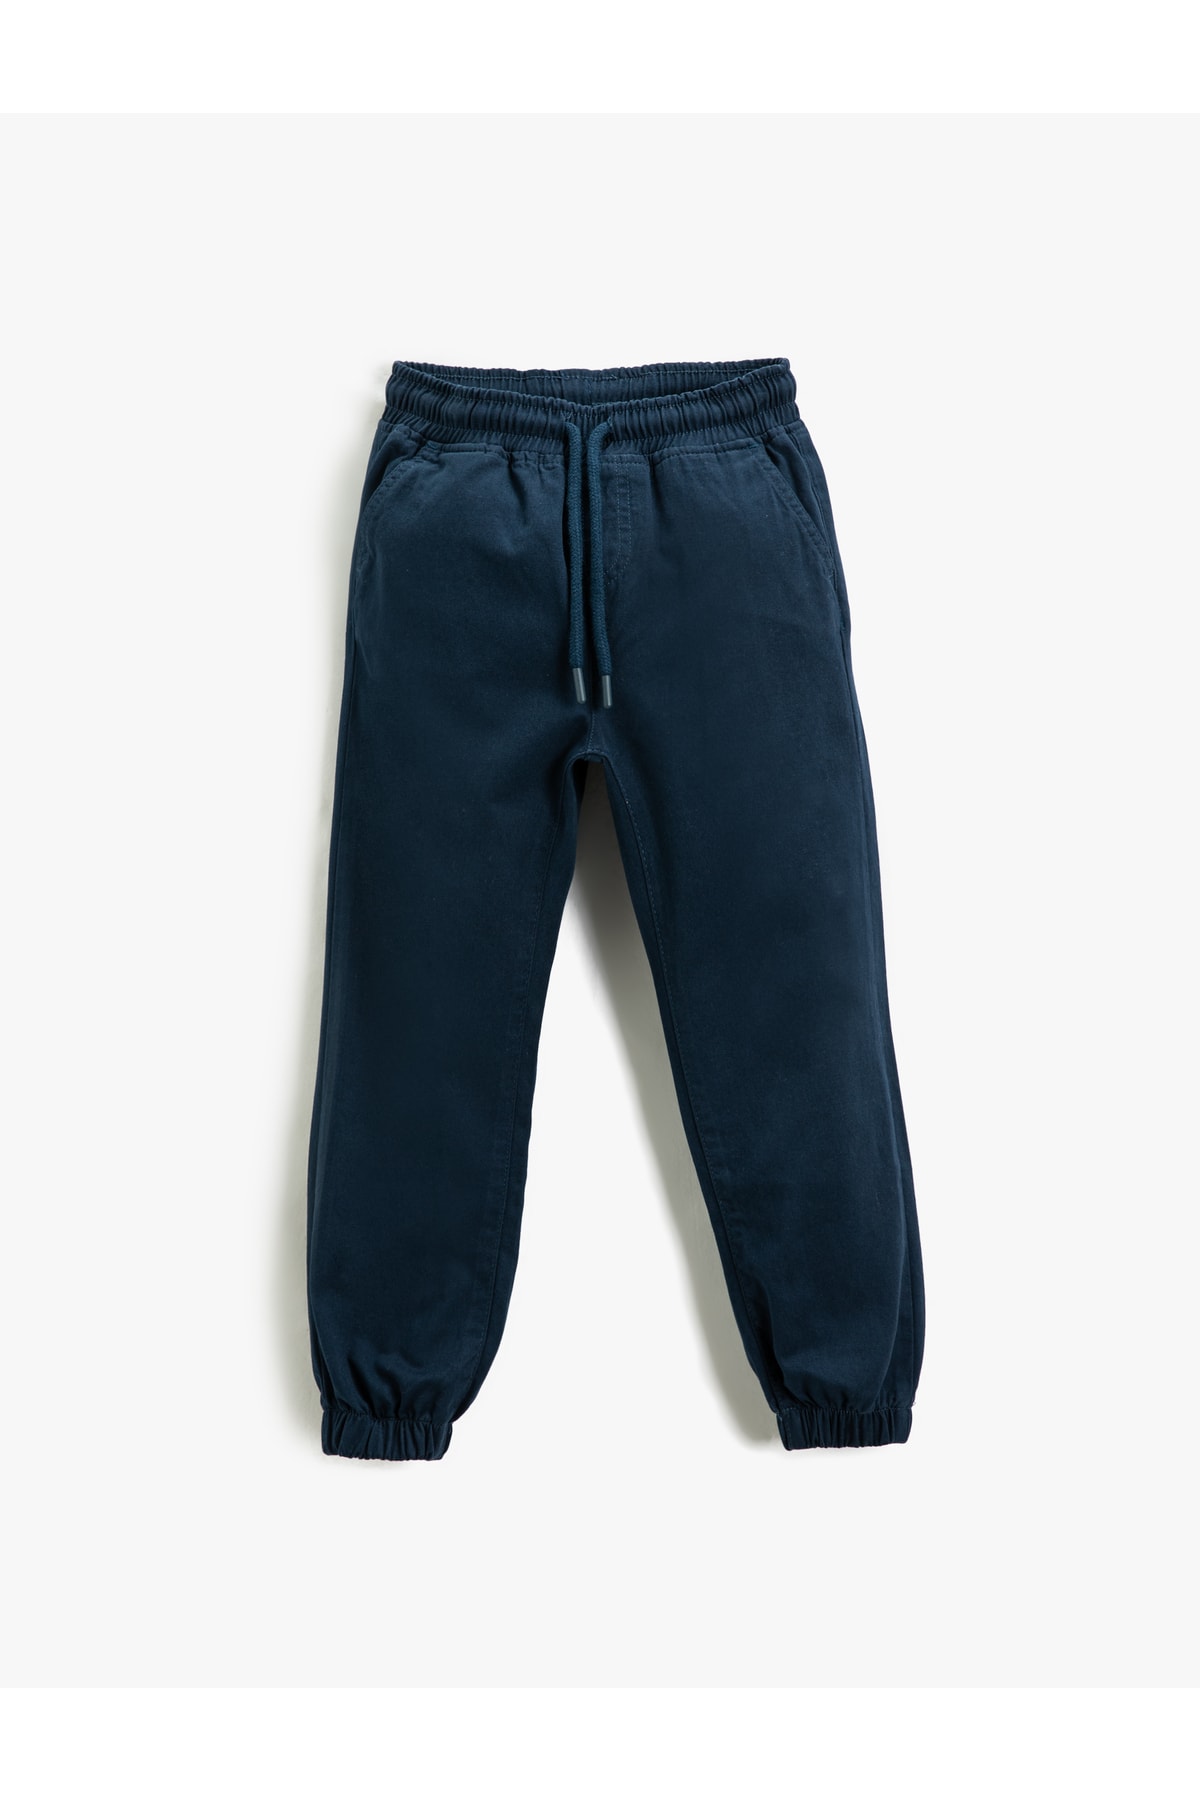 Koton Basic Chino Jogger Trousers Tie Waist Cotton With Pocket.